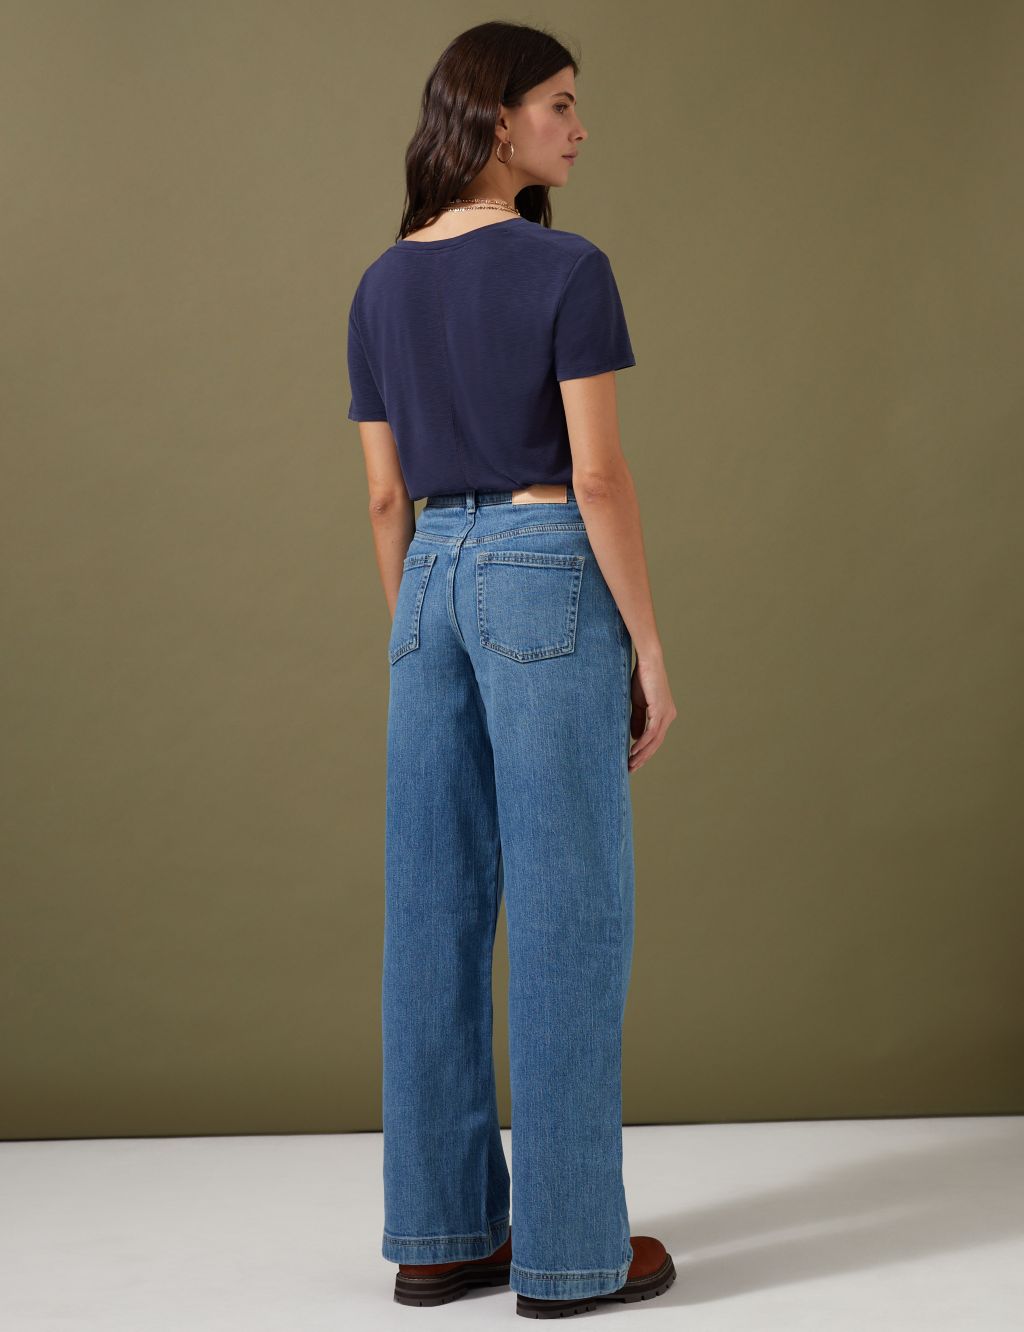 High Waisted Floral Wide Leg Jeans image 4